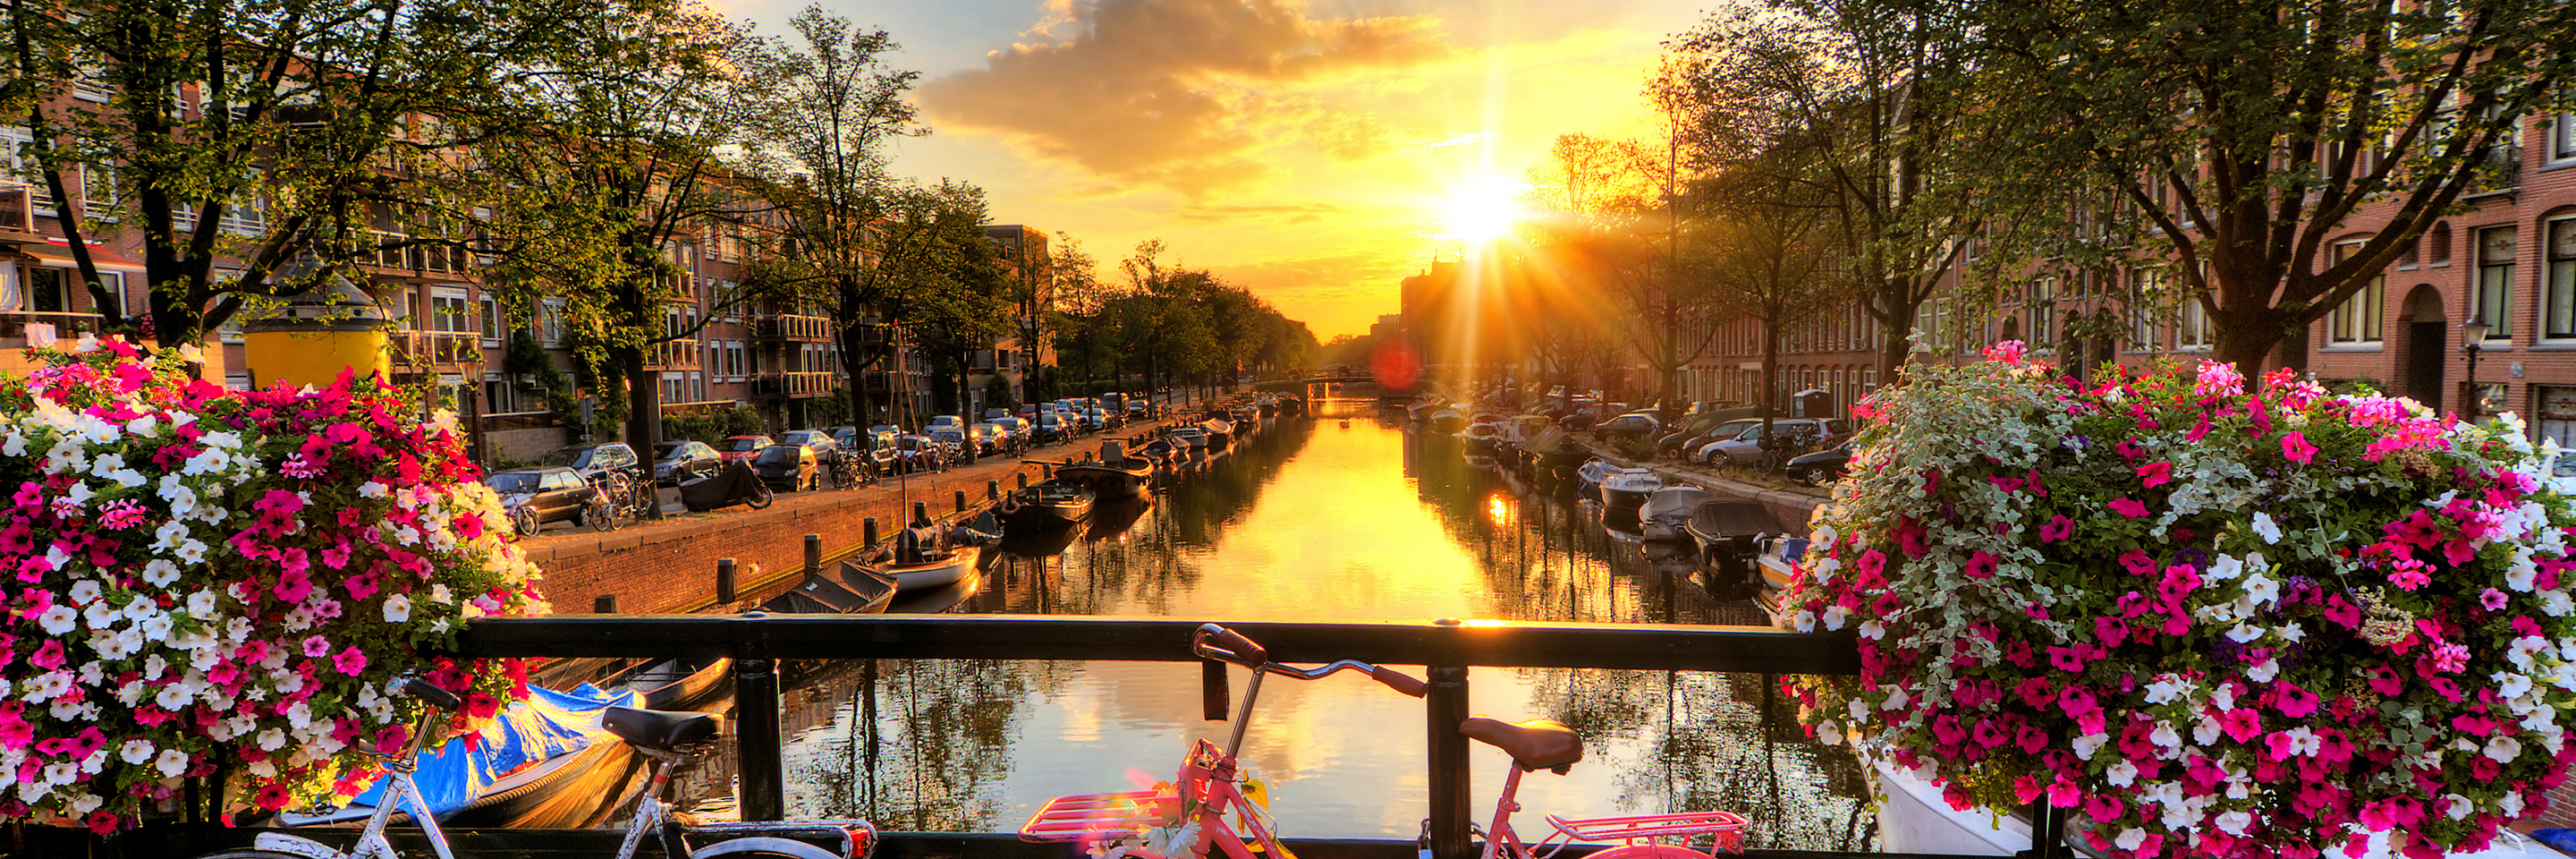 Tulip Time in Holland & Belgium for Garden and Nature Lovers with 1 Night in Amsterdam